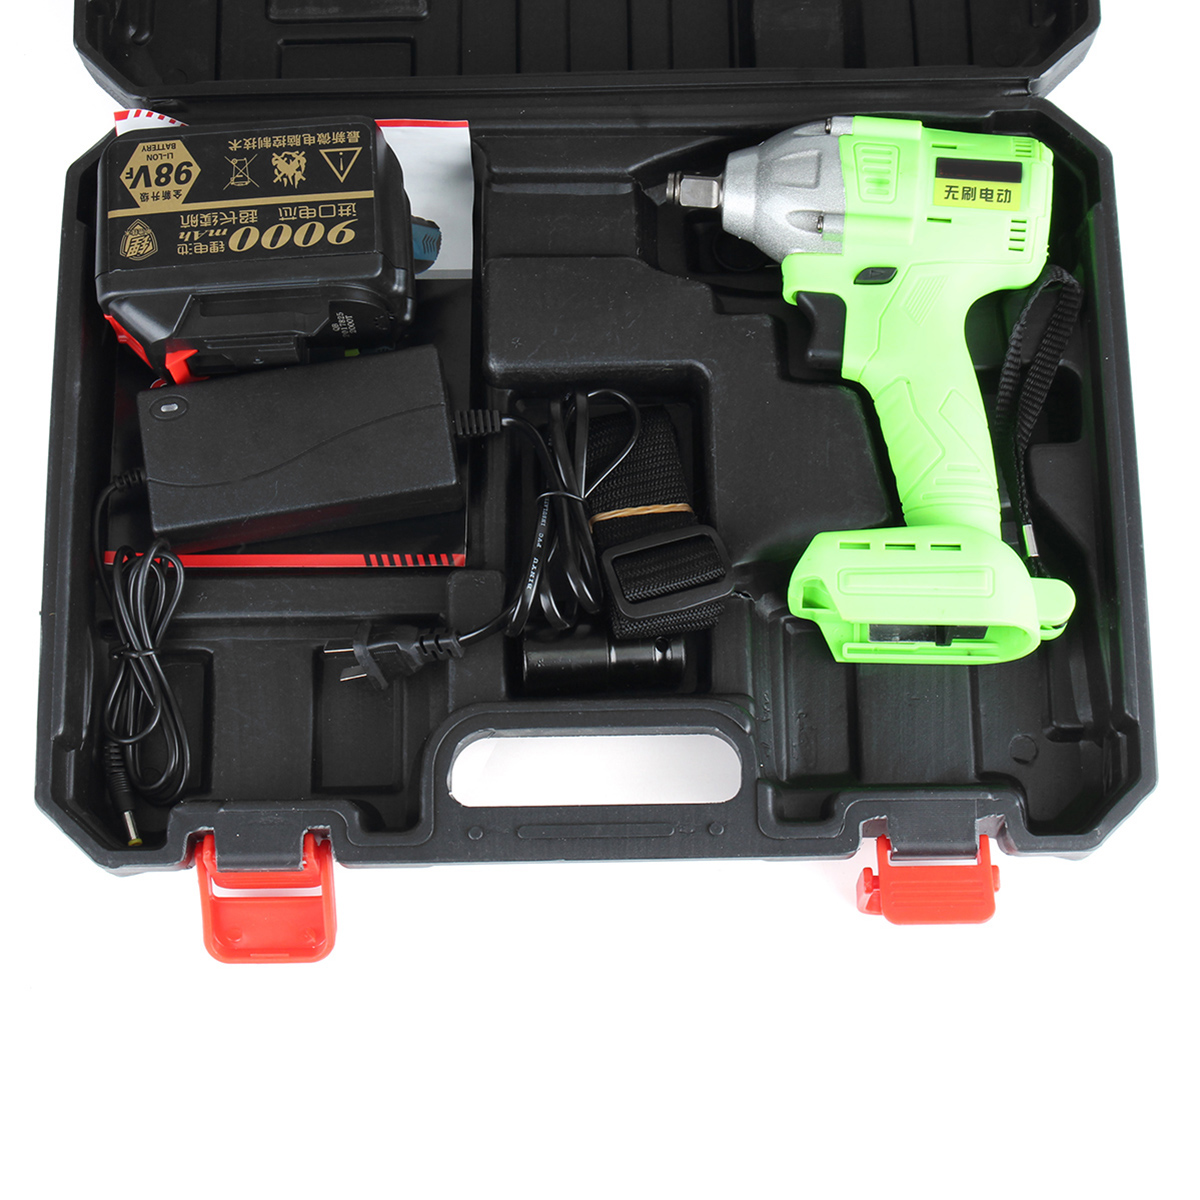 98V-9000mAh-Cordless-Lithium-Ion-Electric-Impact-Wrench-Power-Wrenche-Brushless-Motor-1270466-8